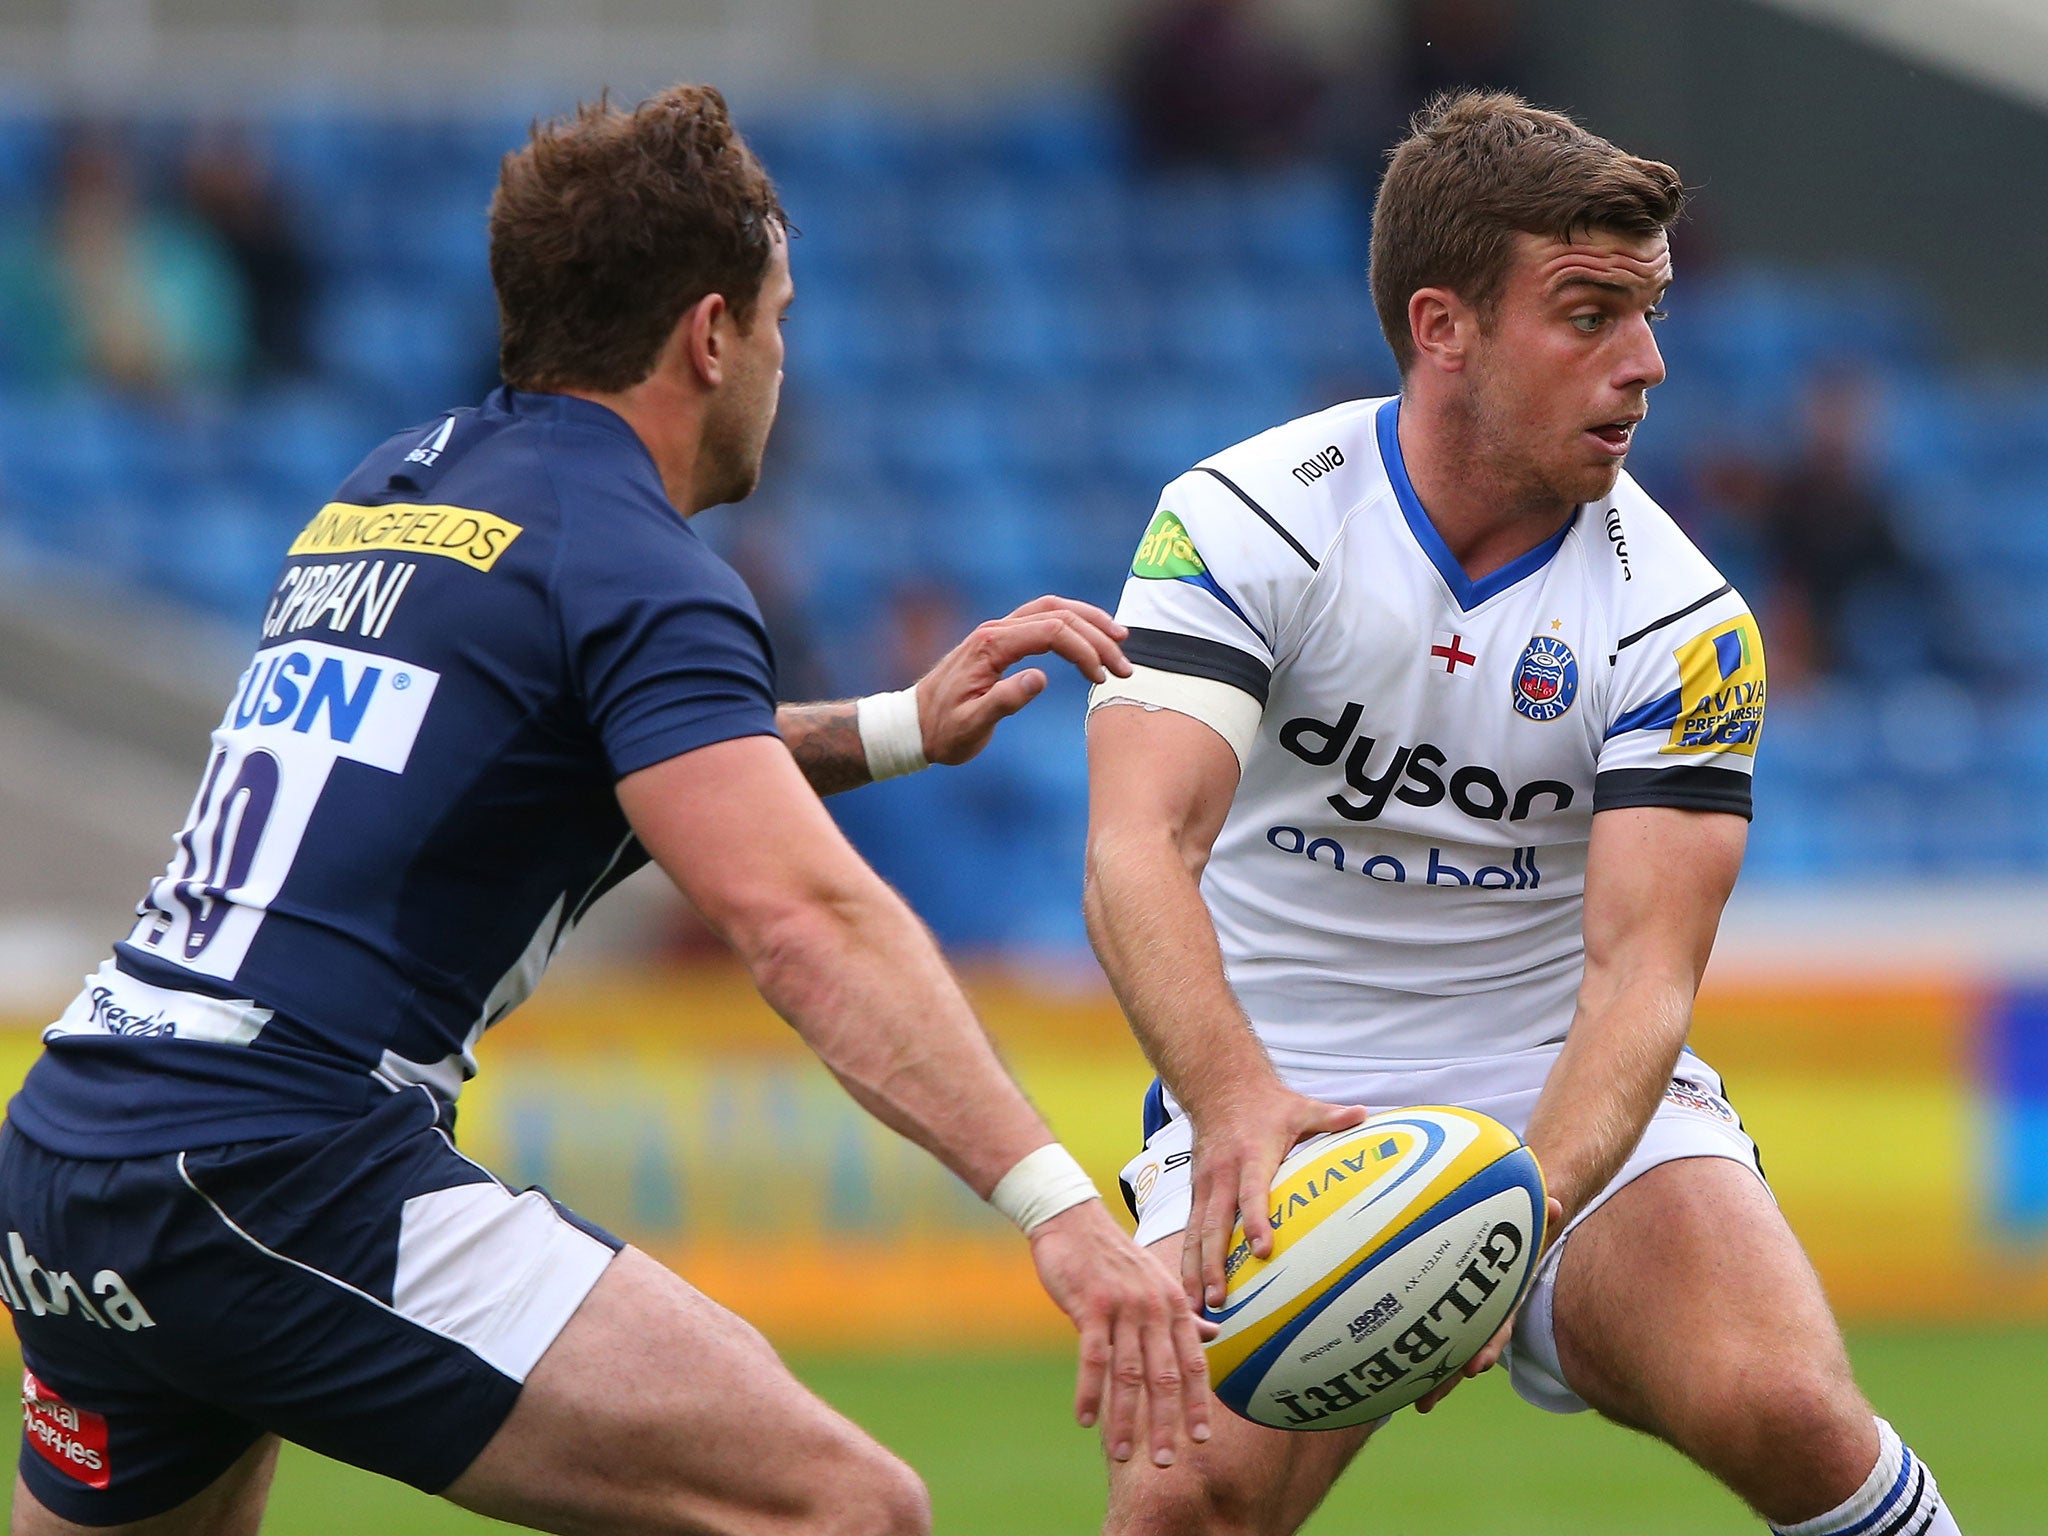 George Ford gets the ball away despite the attentions of Danny Cipriani